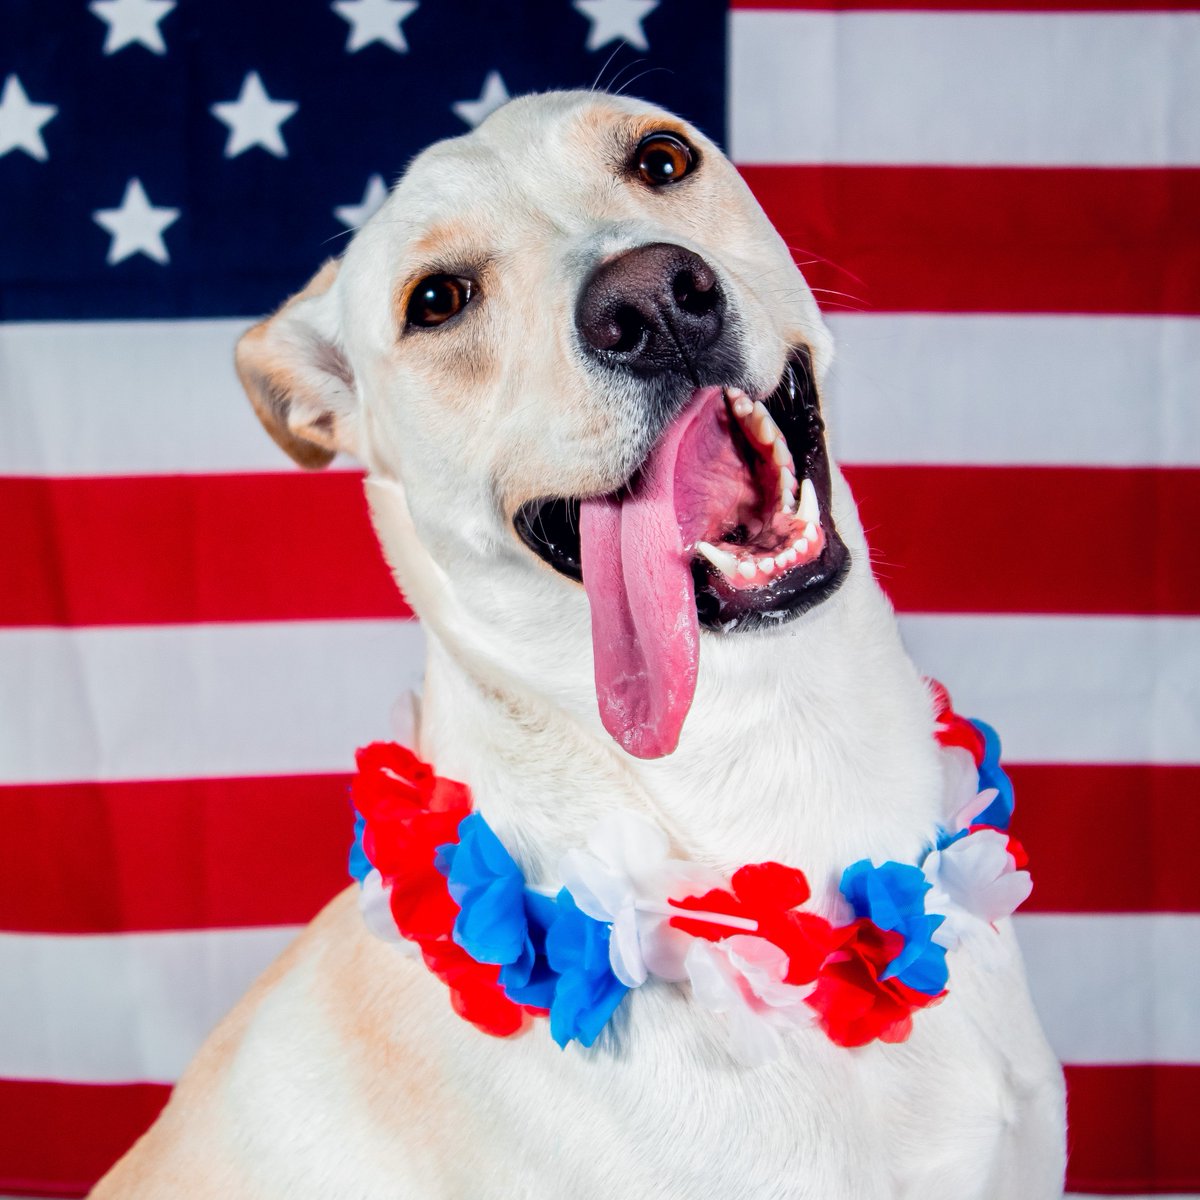 Have a safe & fun Memorial Day spent with friends and family-- especially those furbabies! 🐾 Post featuring: Luna, Colby, & Dain 🐶 #DE #Delaware #DHA #MemorialDay #Memorial #USA #America #Dogs #Puppies #Flag #Adopt #Shelter #Adoption #DelawareHumane #Pets #Animals